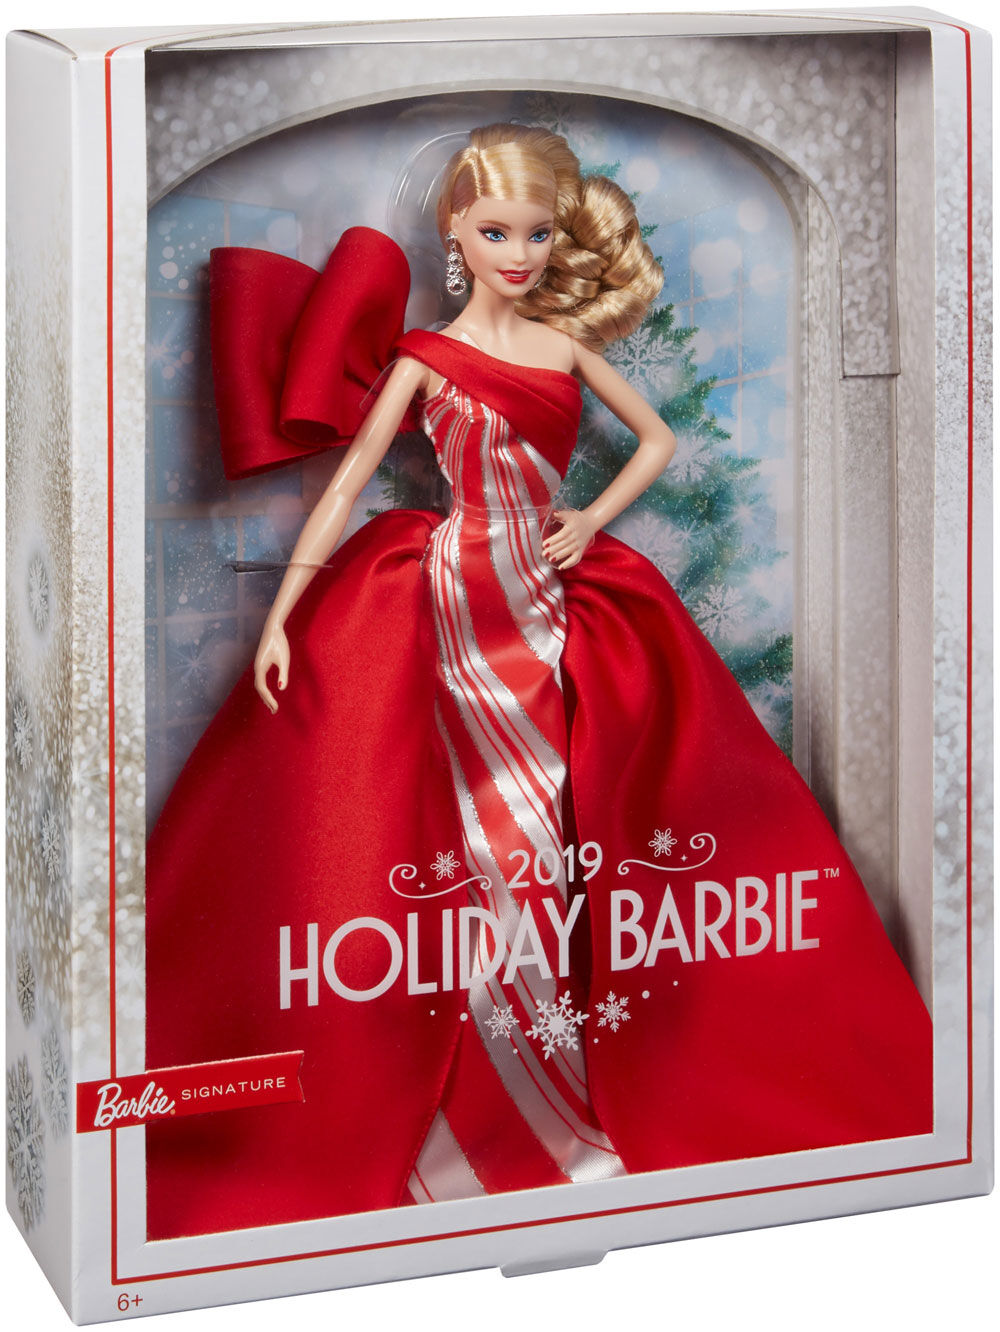 when was the first holiday barbie